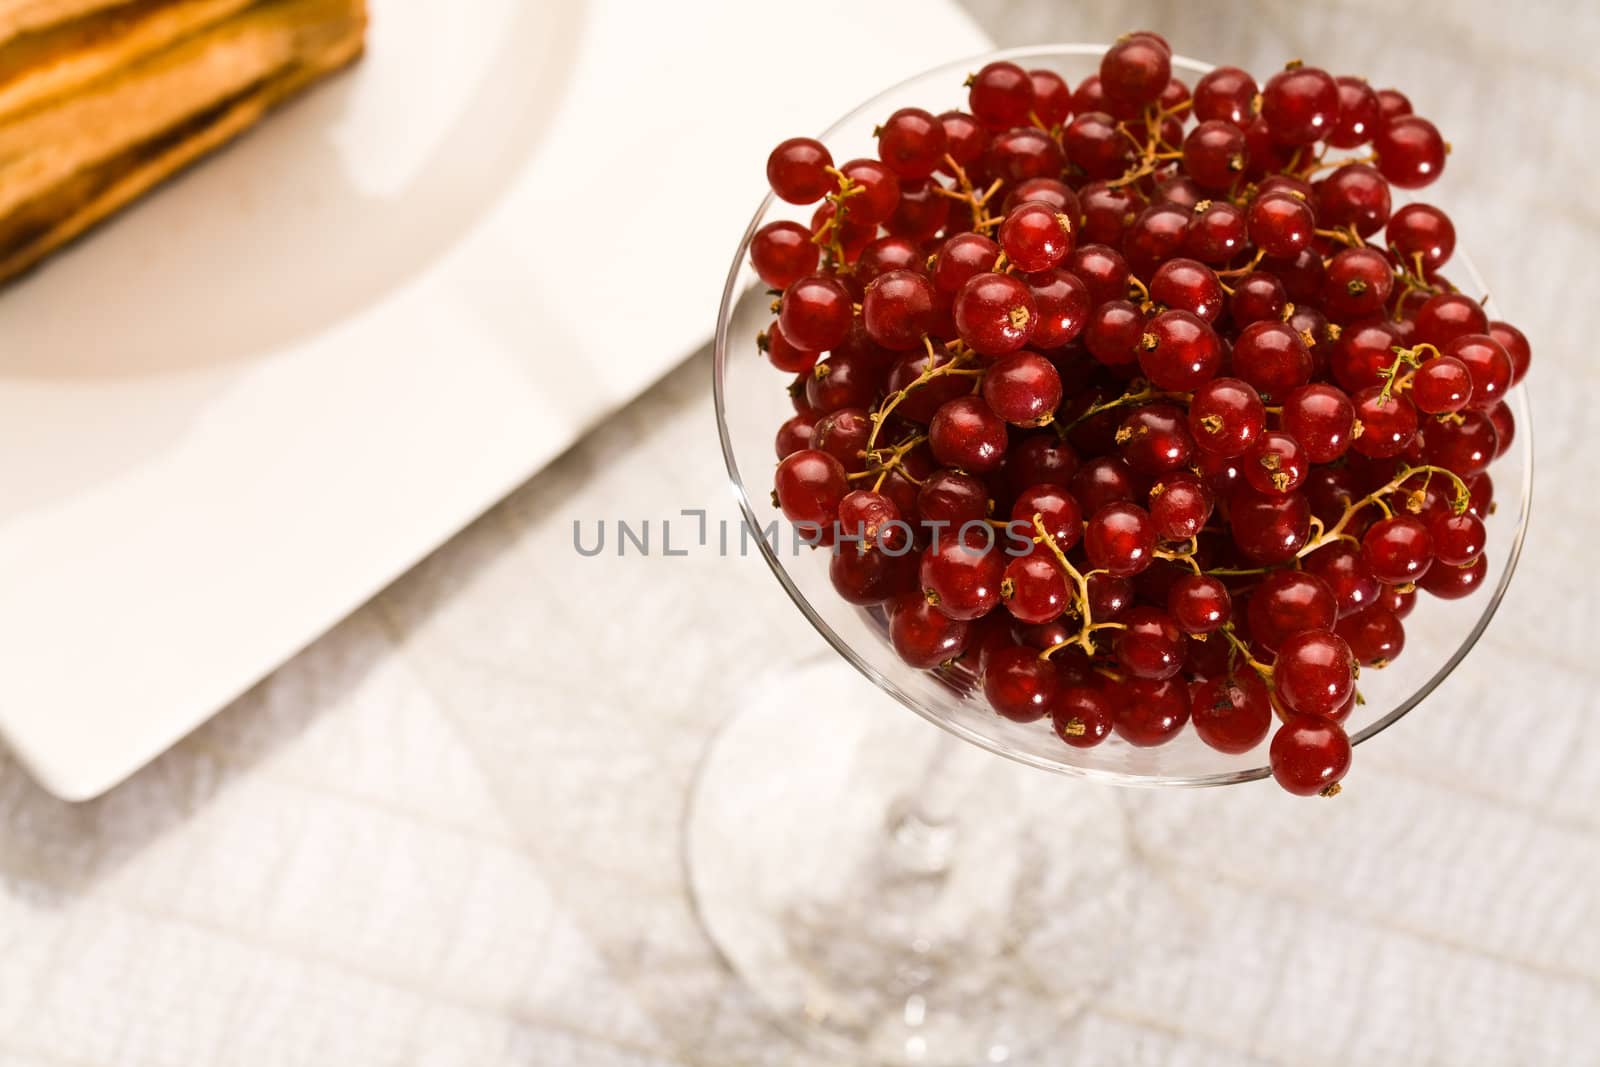 food series: toasts and red currant on the white plate